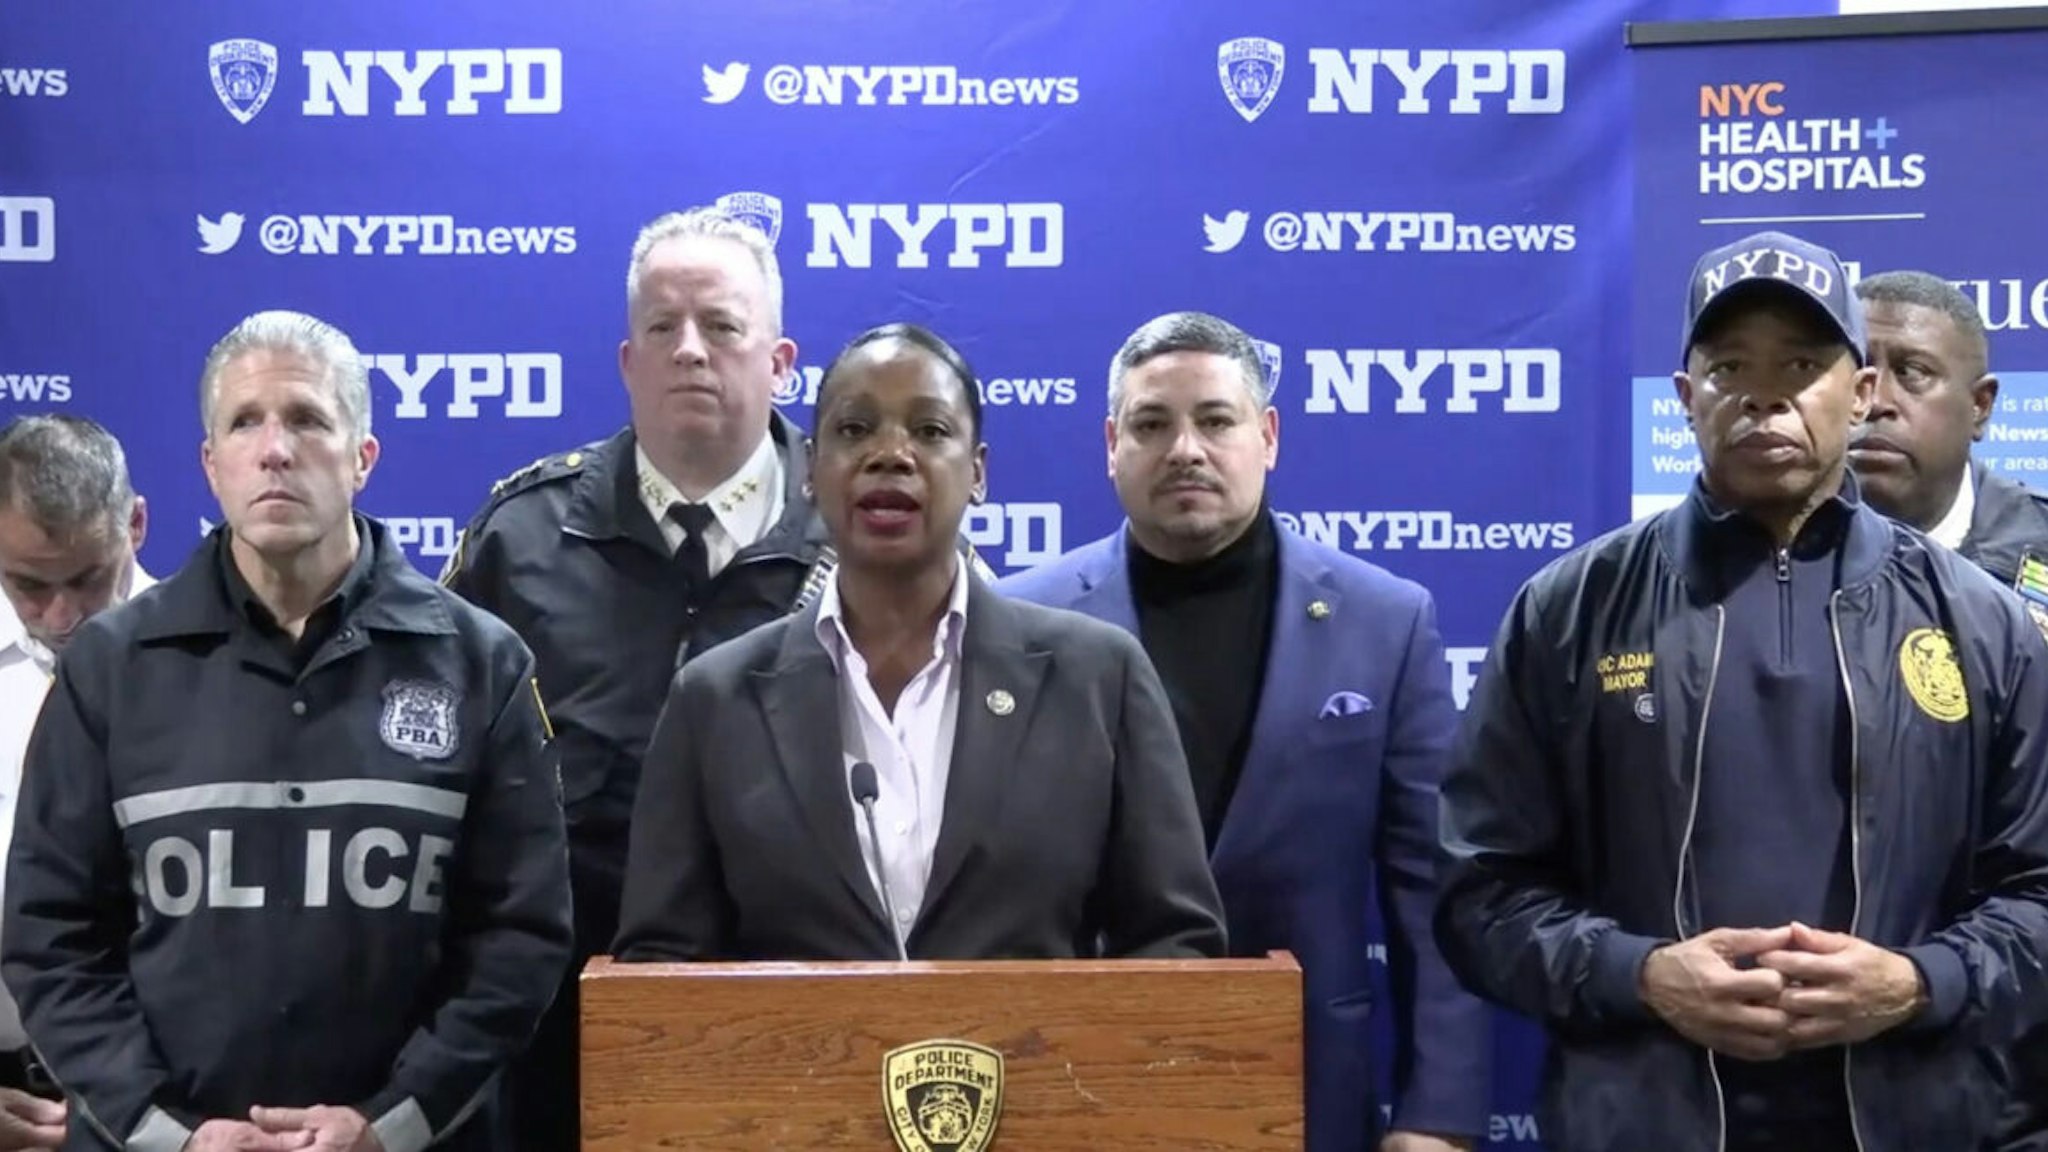 New York Police Department Superintendent Keechant Sewell (3rd L) speaks during press conference after 3 NY Police Officer wounded by machete attack at Times Square in New York, United States on January 01, 2023